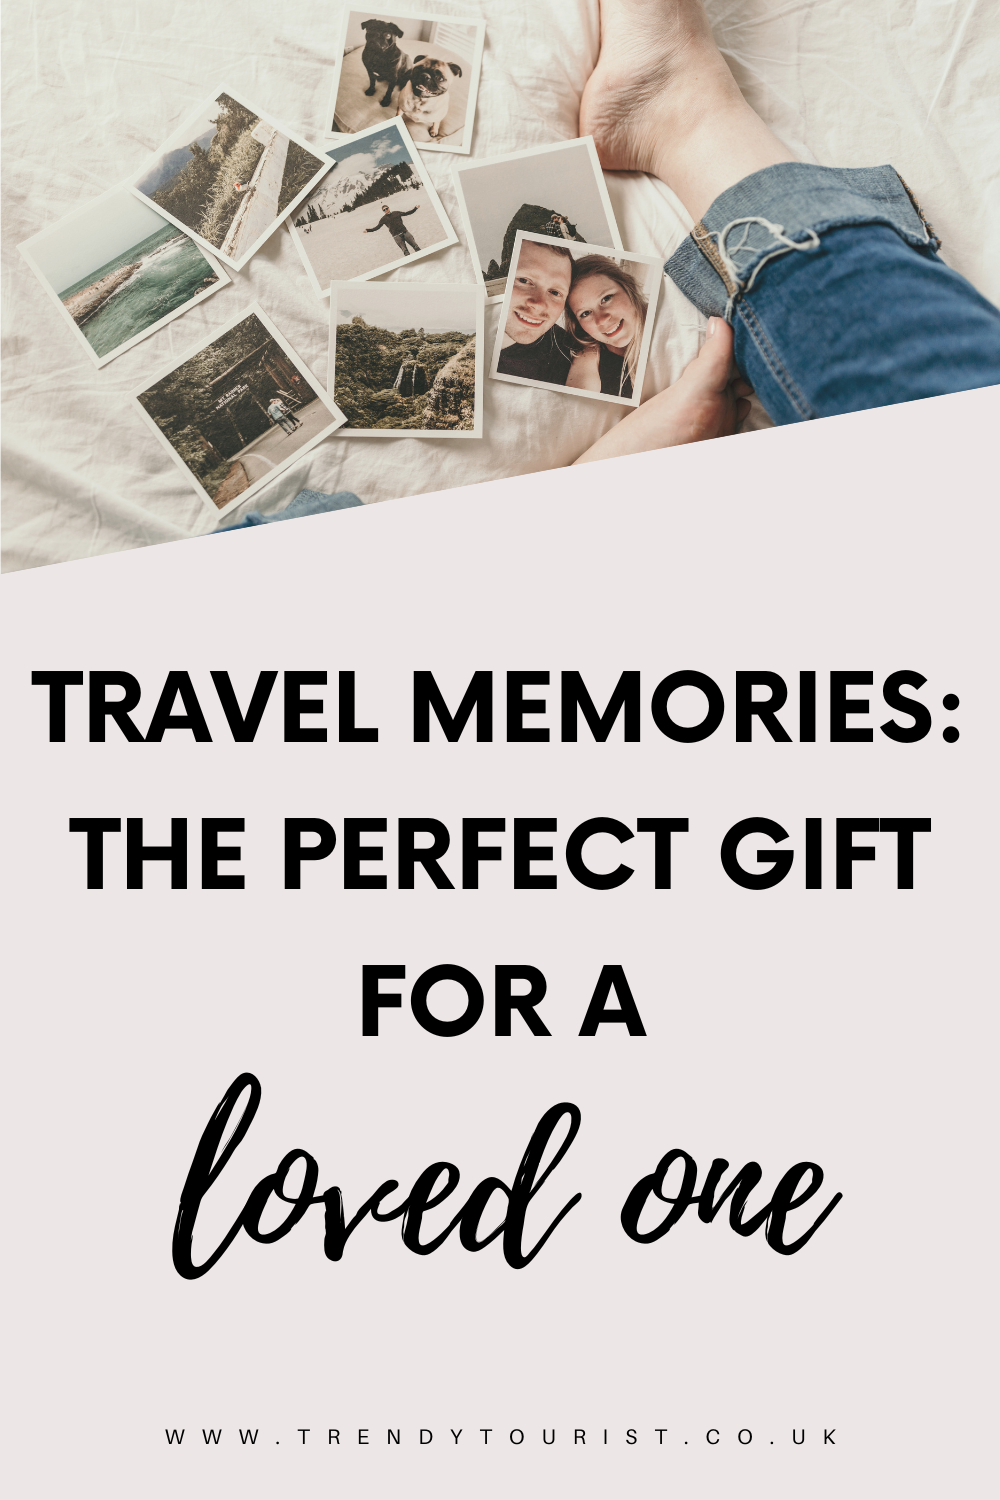 Travel Memories: The Perfect Gift for a Loved One